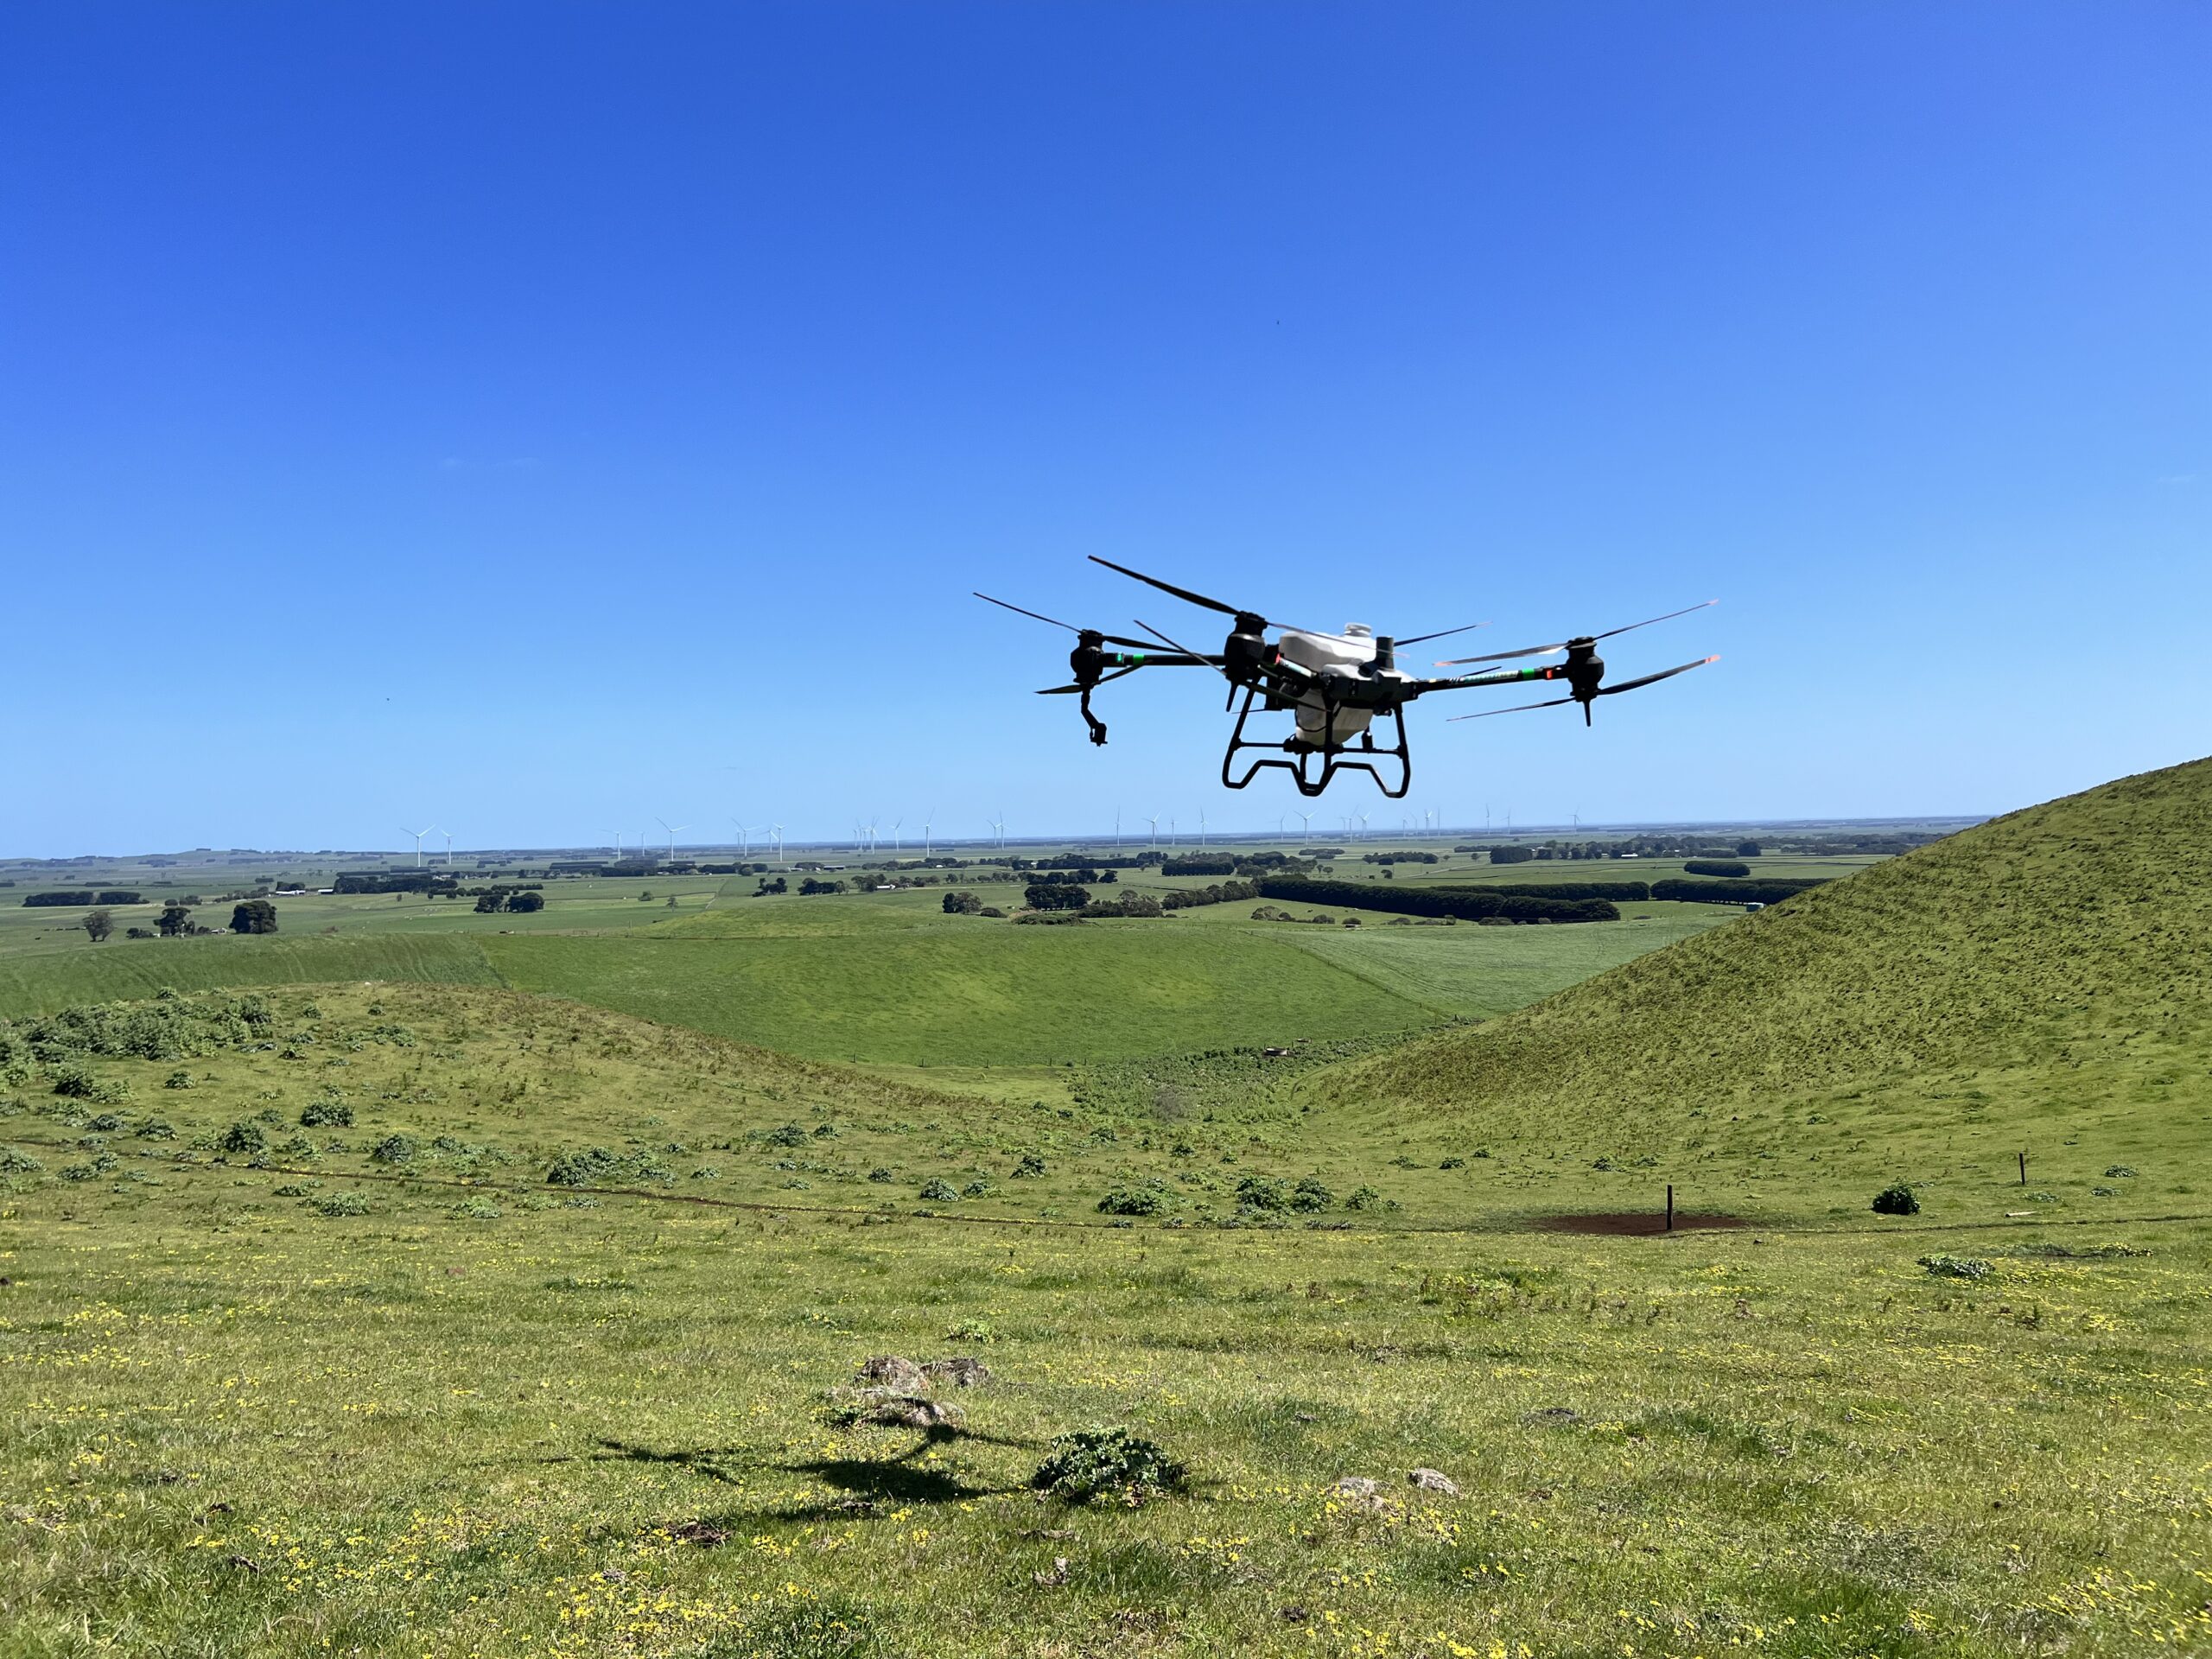 Blackberry spraying,Blackberry spraying with drones,Drone blackberry spraying,reduced chemical usage with drones,spraying difficult terrains,Blackberry spraying VIC,Blackberry spraying victoria,Blackberry spraying Cobden,Blackberry spraying simpson